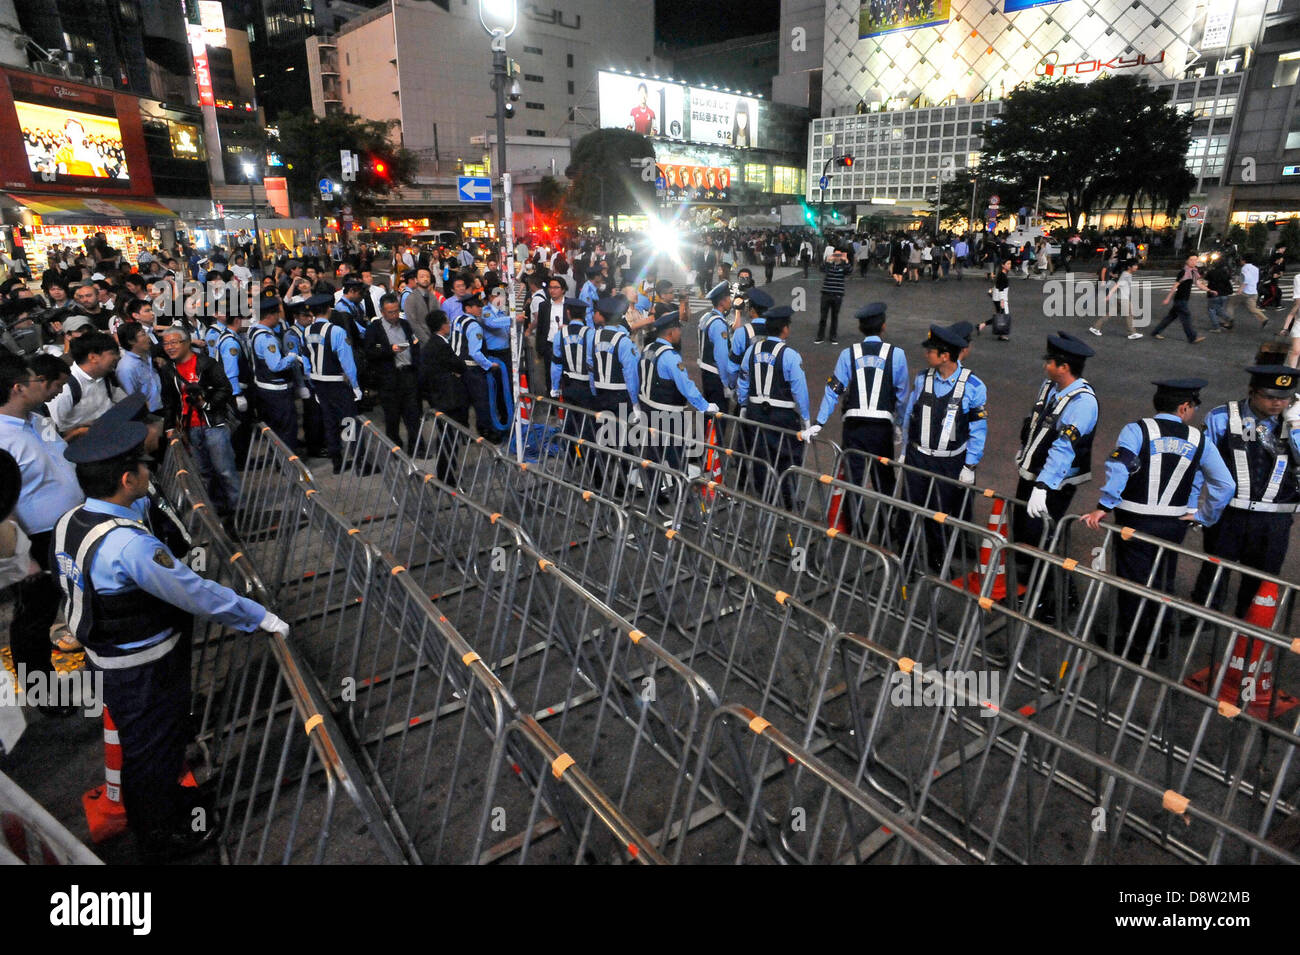 Saitama, Japan. 4th June 2013. June 4th, 2013 : Tokyo, Japan - Police Officers prepared to restrict pedestrians and fans of the Japan National Soccer team, which was having a game of the final Asian qualifiers for the 2014 World Cup against Australia, in front of Shibuya Station, Shibuya, Tokyo Japan on June 4, 2013. In 2010. there were so many people getting together when the team became a qualifier, and police decided to regulate the fan this time.  (Photo by Koichiro Suzuki/AFLO/Alamy Live News) Stock Photo